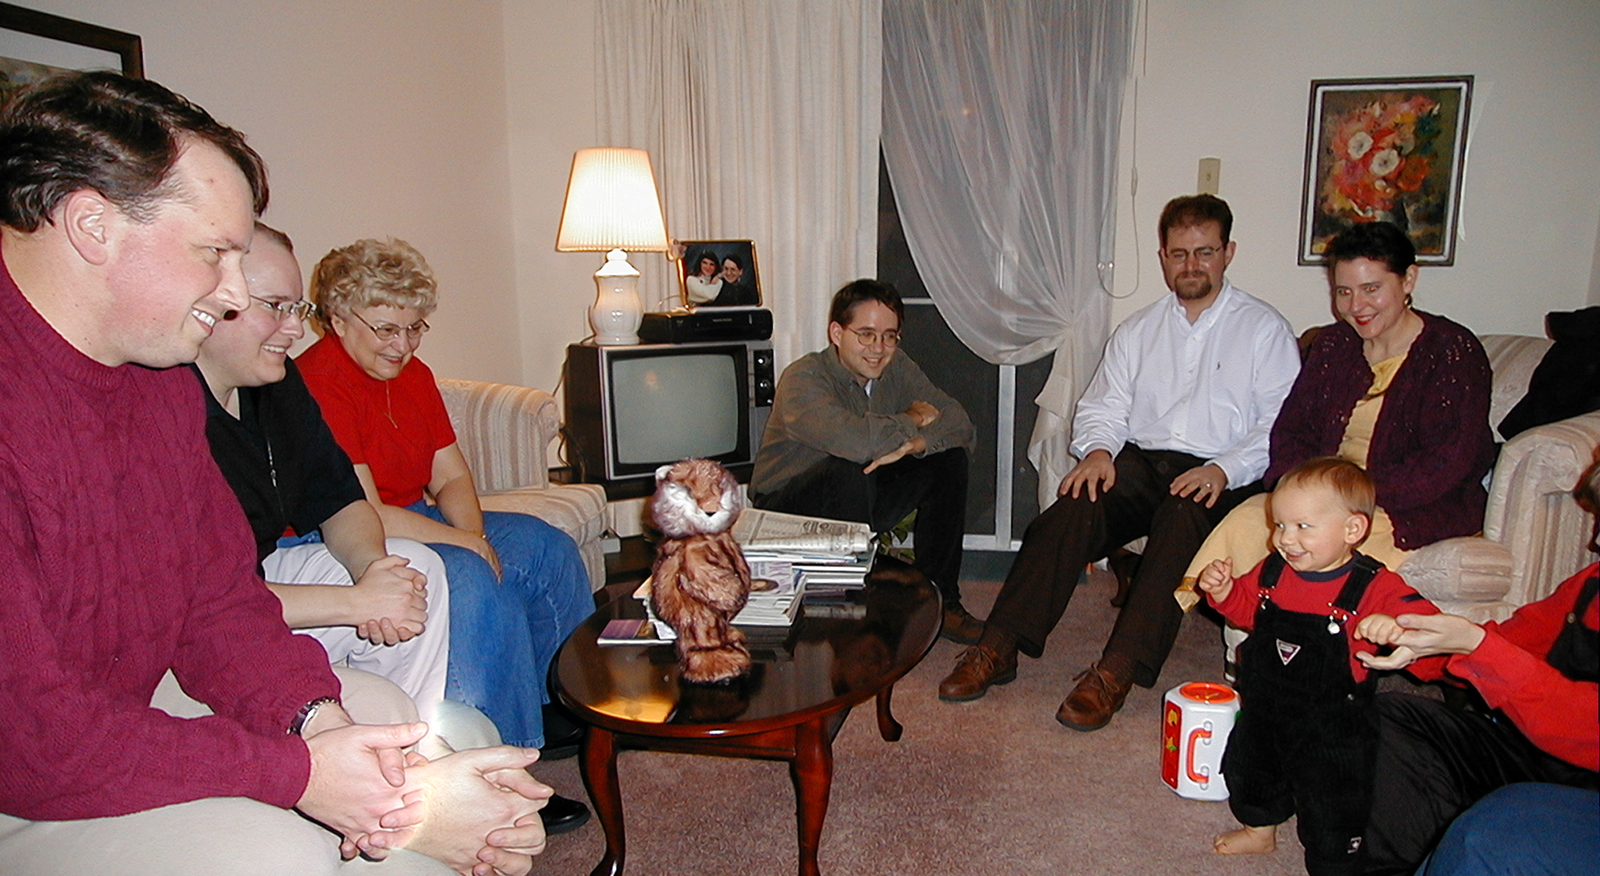 Paul, Mom, Aunt Dory, Robert, Jackie and Steve at Aunt Dory's apartment on Christmas evening